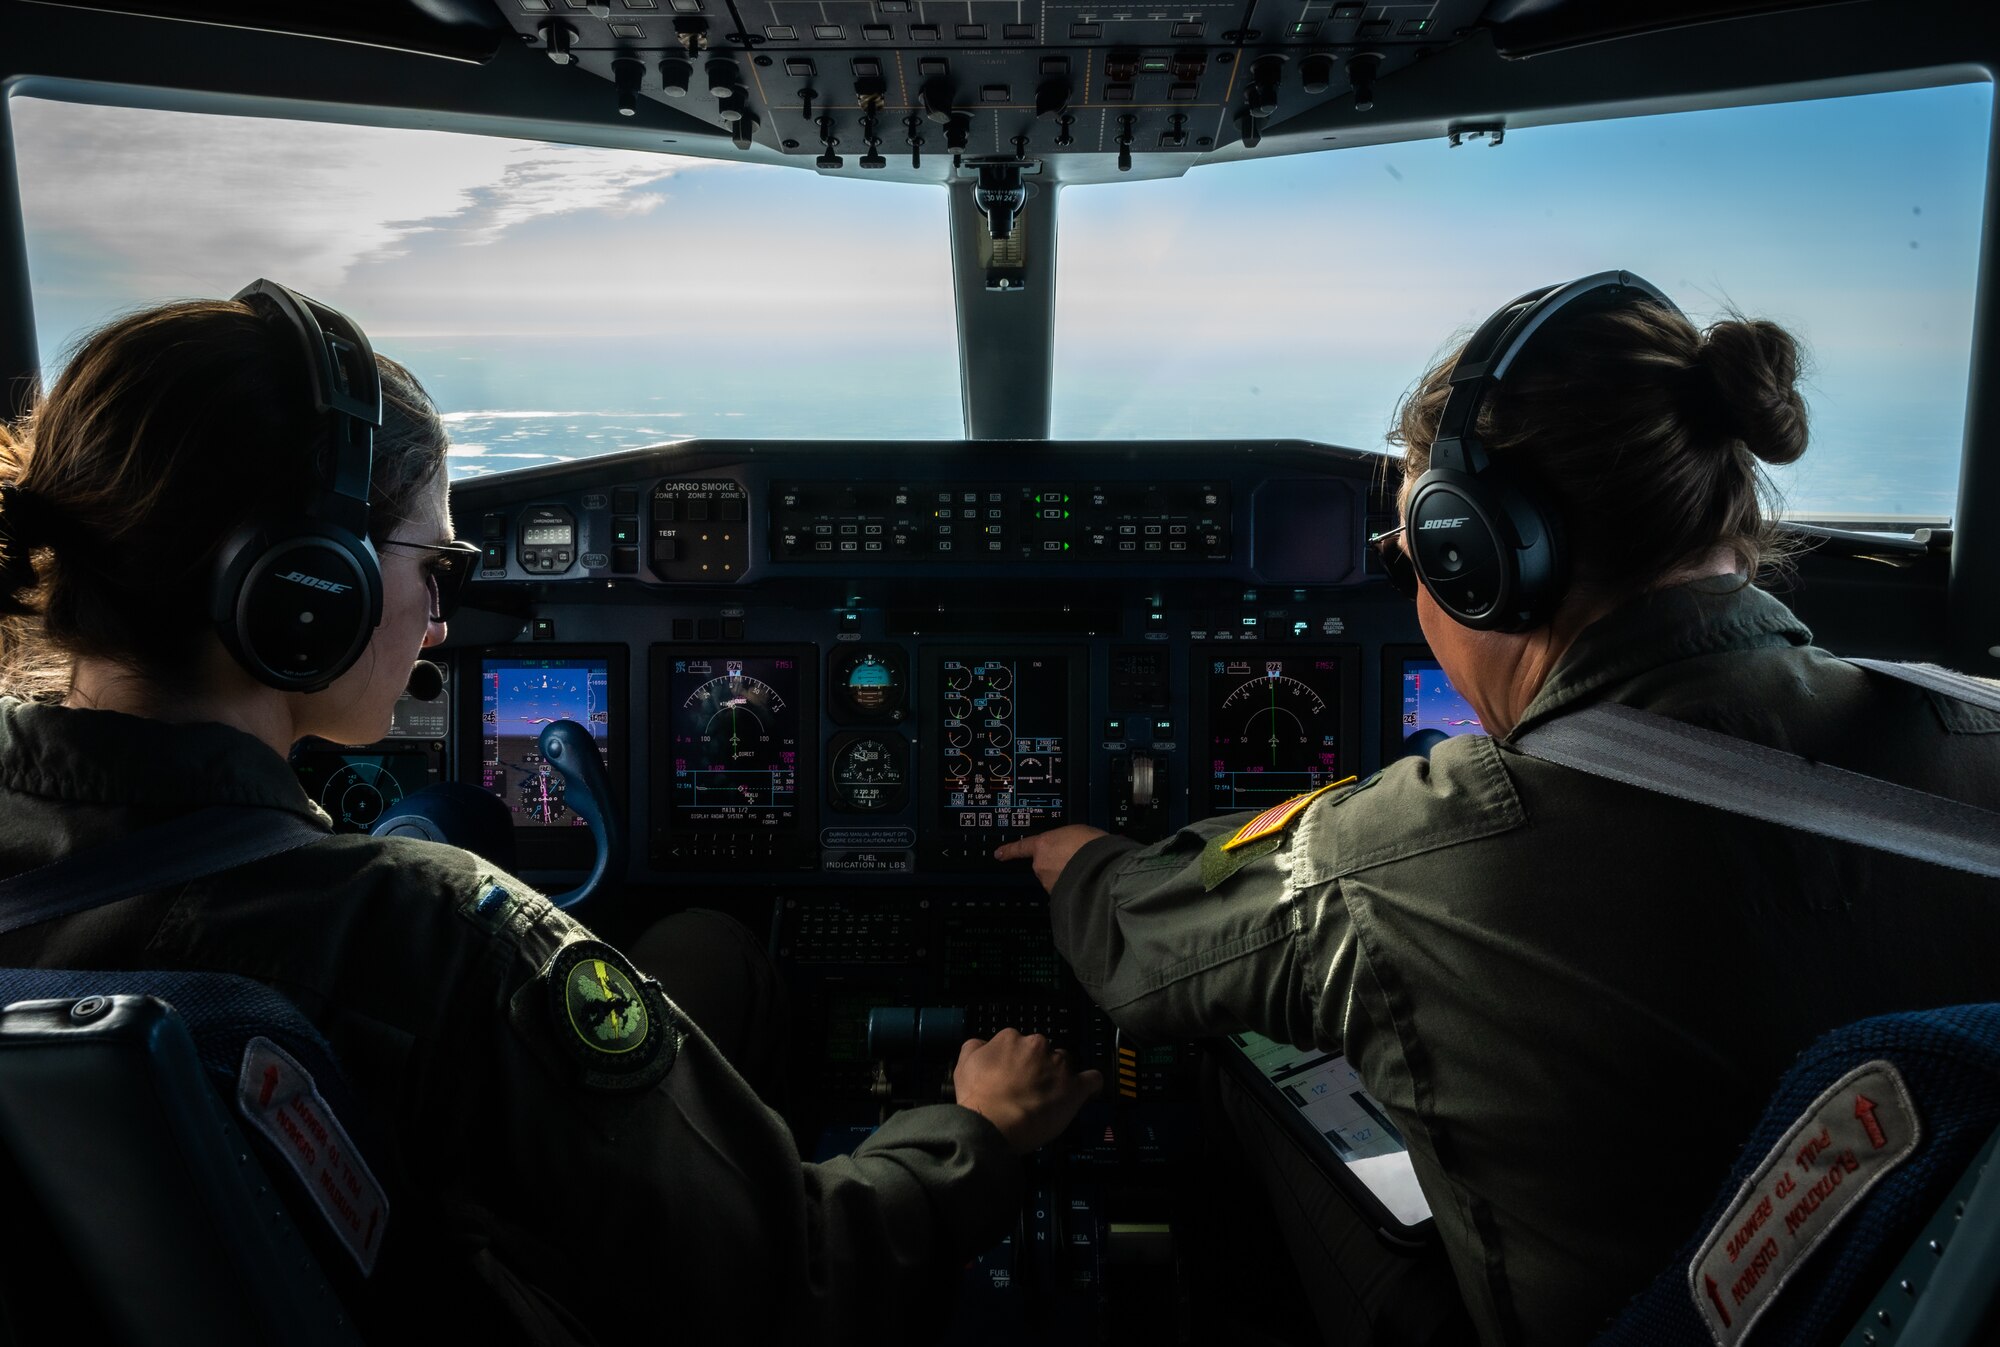 U.S. Air Force 1st Lt. Madeline Wawrzyniak, left, and U.S. Air Force Lt. Col. Heather Demis, right, aircraft commanders flying with the 524th Special Operations Squadron, pilot the C-146A Wolfhound after the Youth Open House March 12, 2022, at Moody Air Force Base, Georgia.